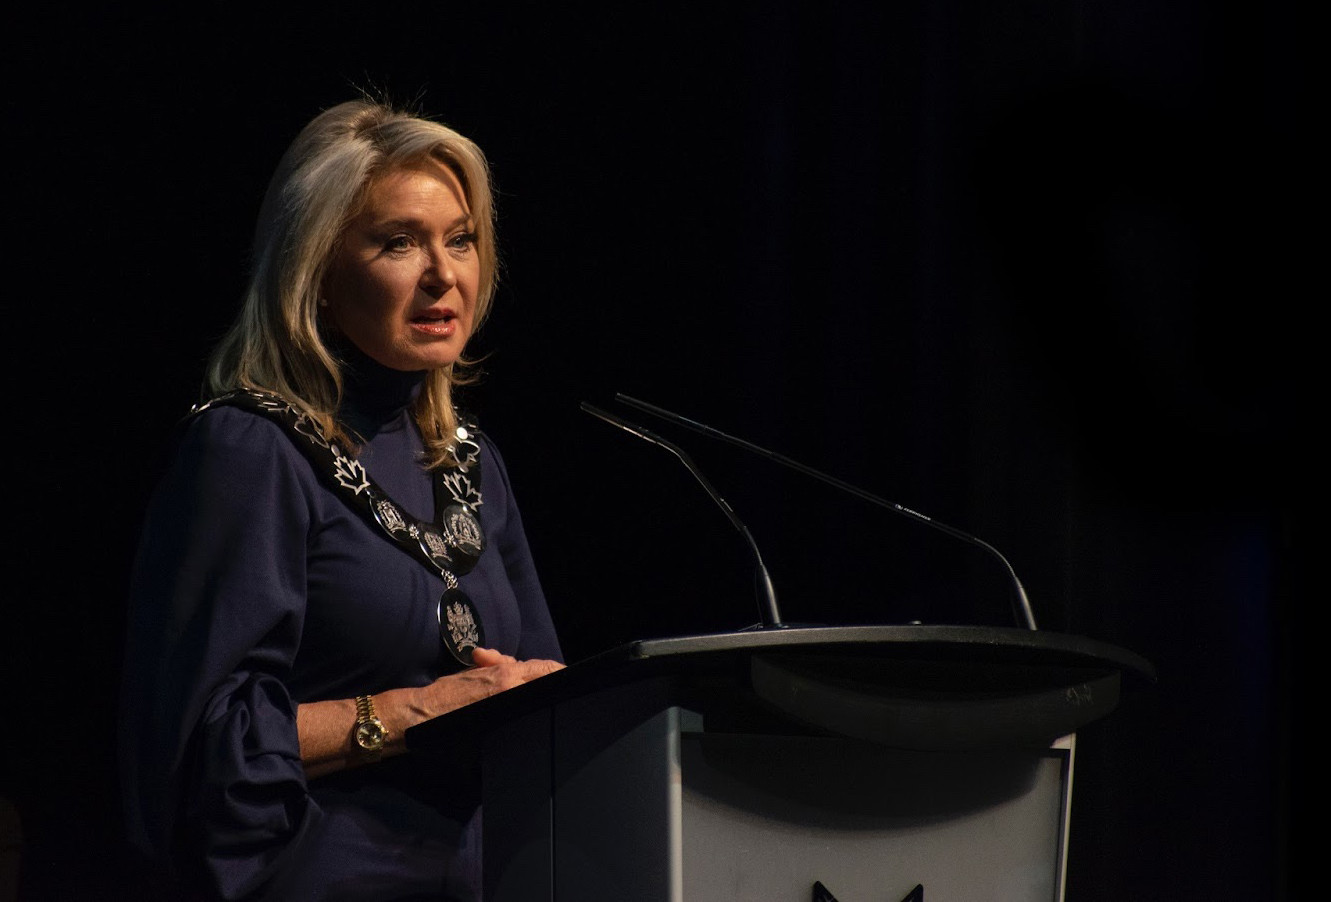 What would Bonnie Crombie’s departure mean for the City of Mississauga?